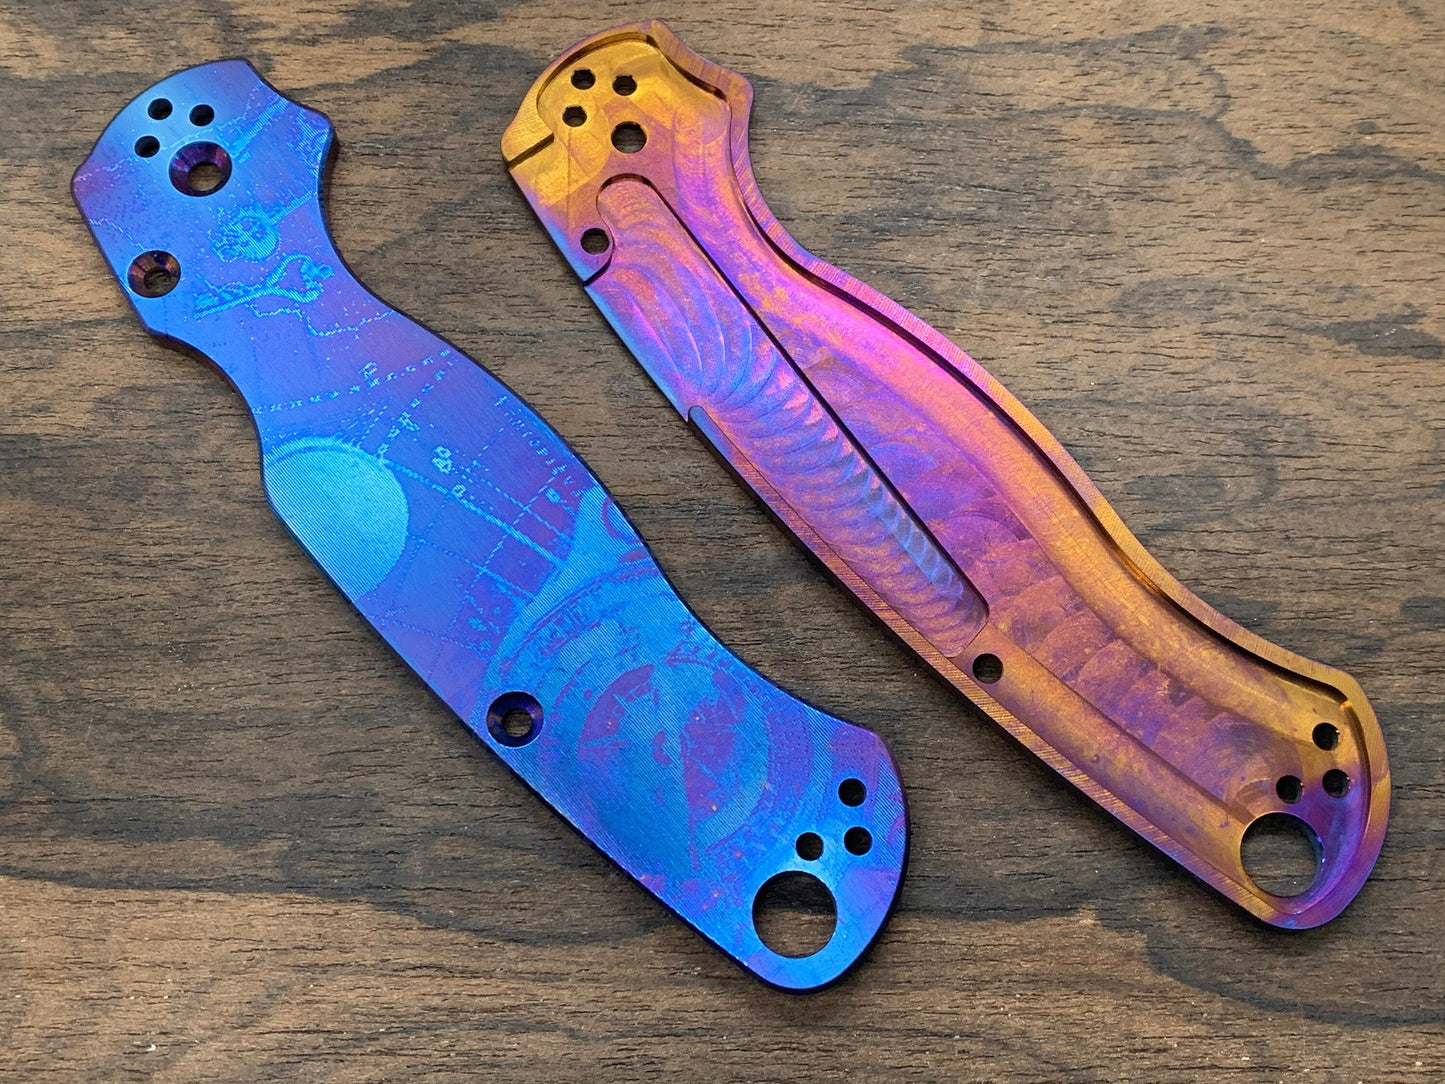 PIRATE Flamed Titanium scales for Spyderco Paramilitary 2 PM2